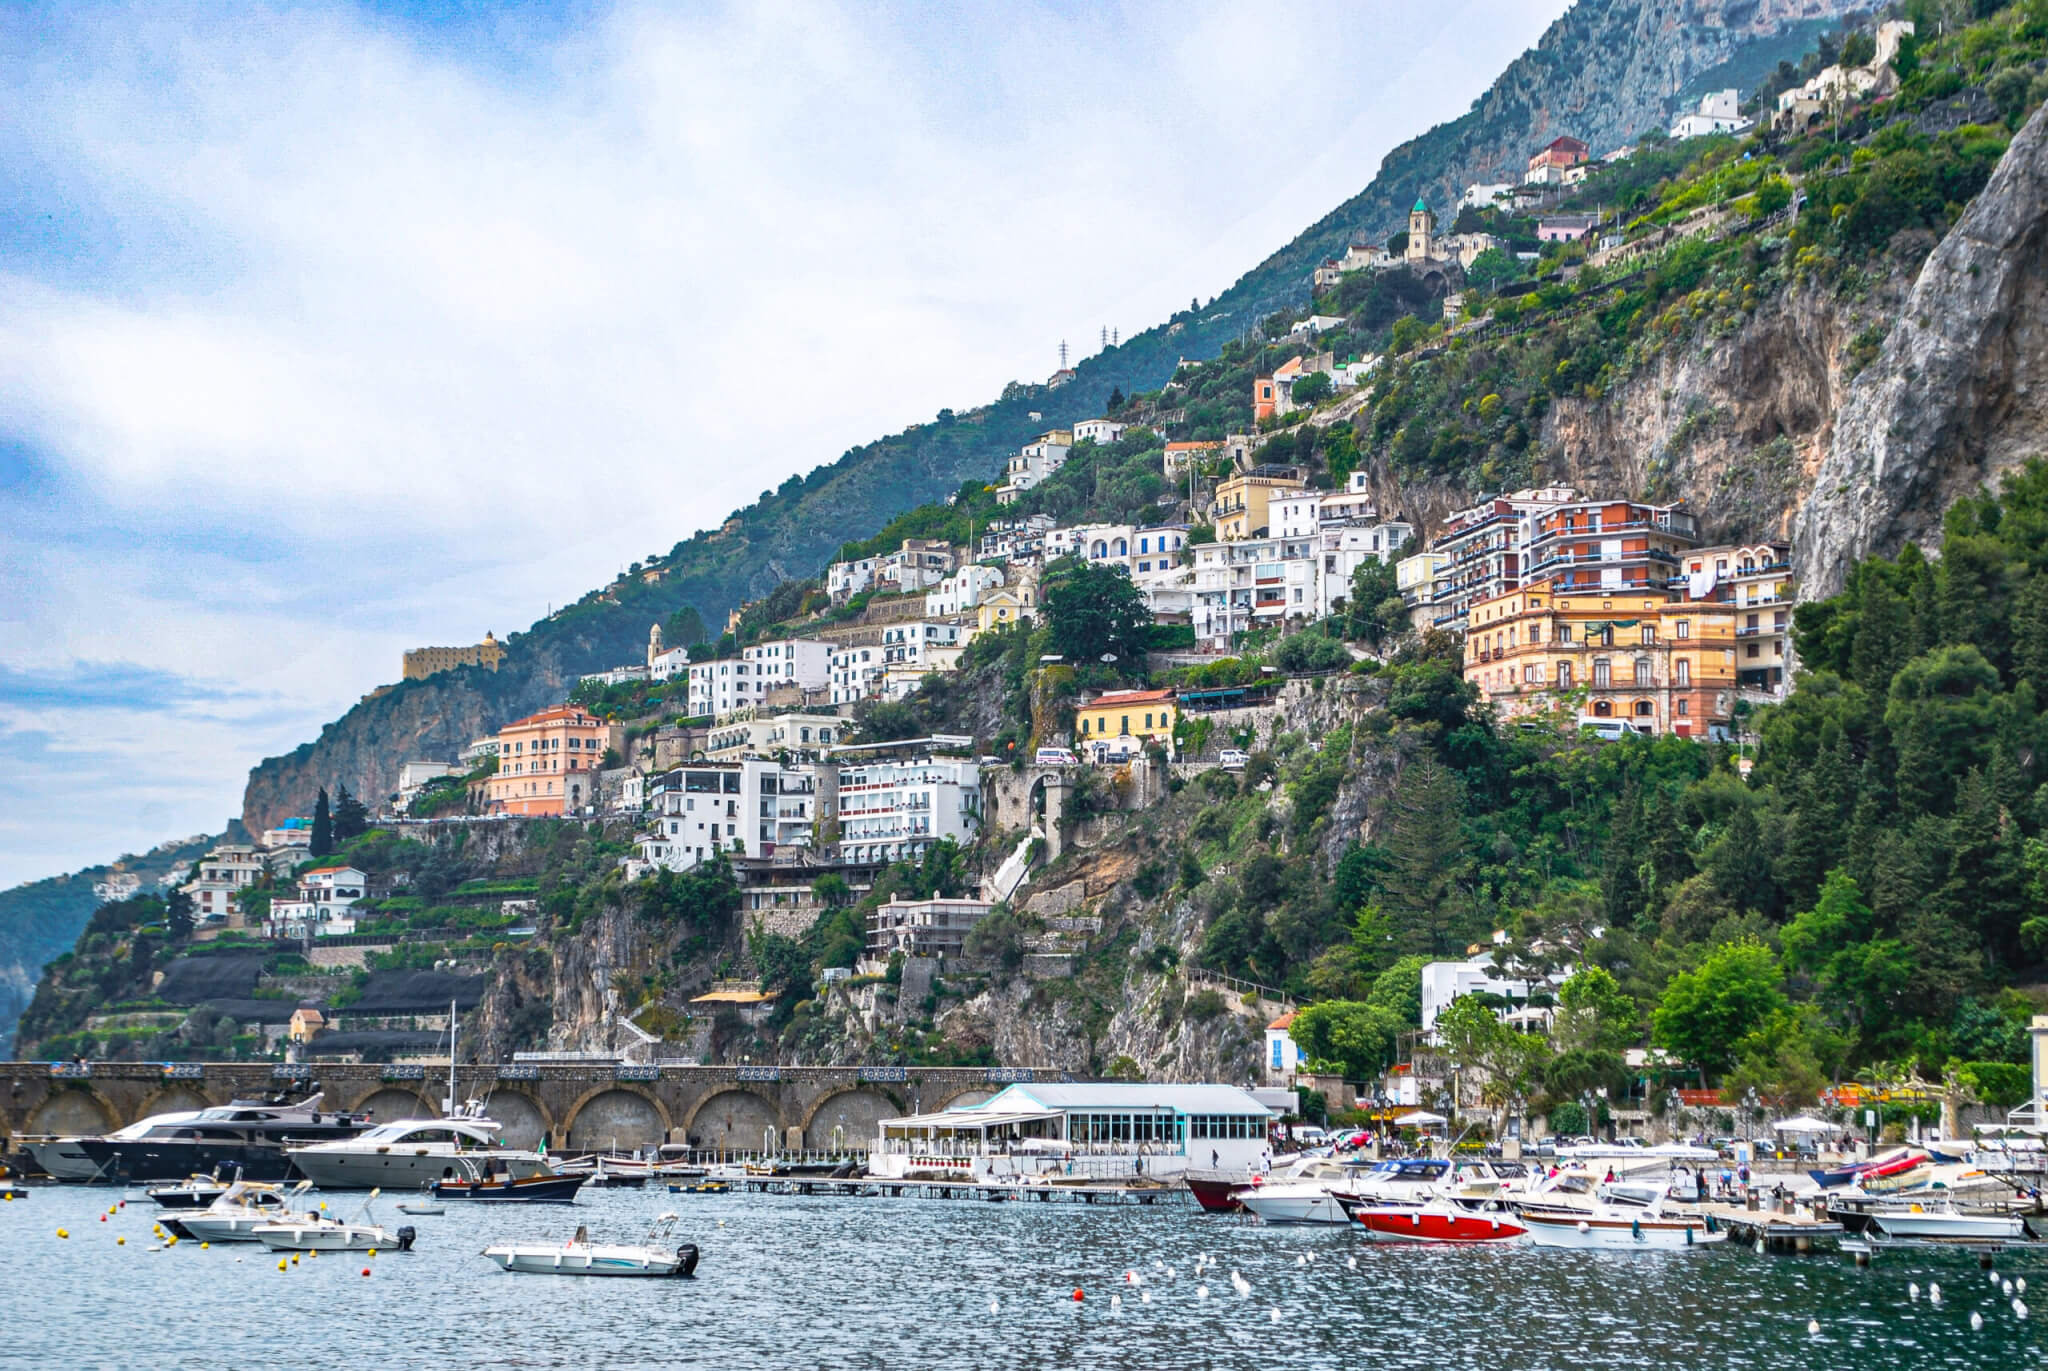 View of buildings on mountain at the amalfi coast in italy at daytime